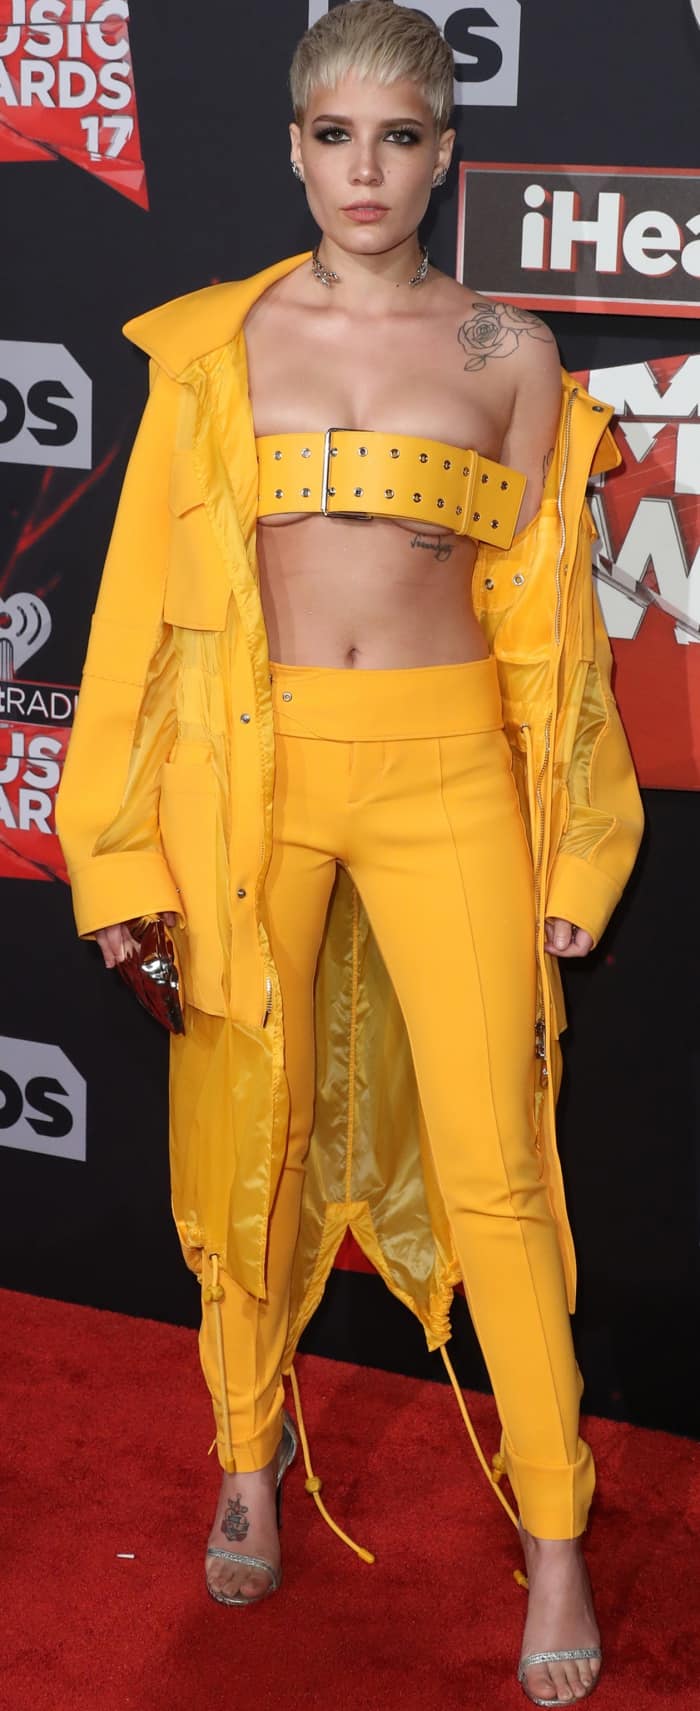 Halsey wearing a yellow Versus Versace look and Stuart Weitzman “Nudistsong” sandals in pearl nappa leather at the 2017 iHeartRadio Music Awards